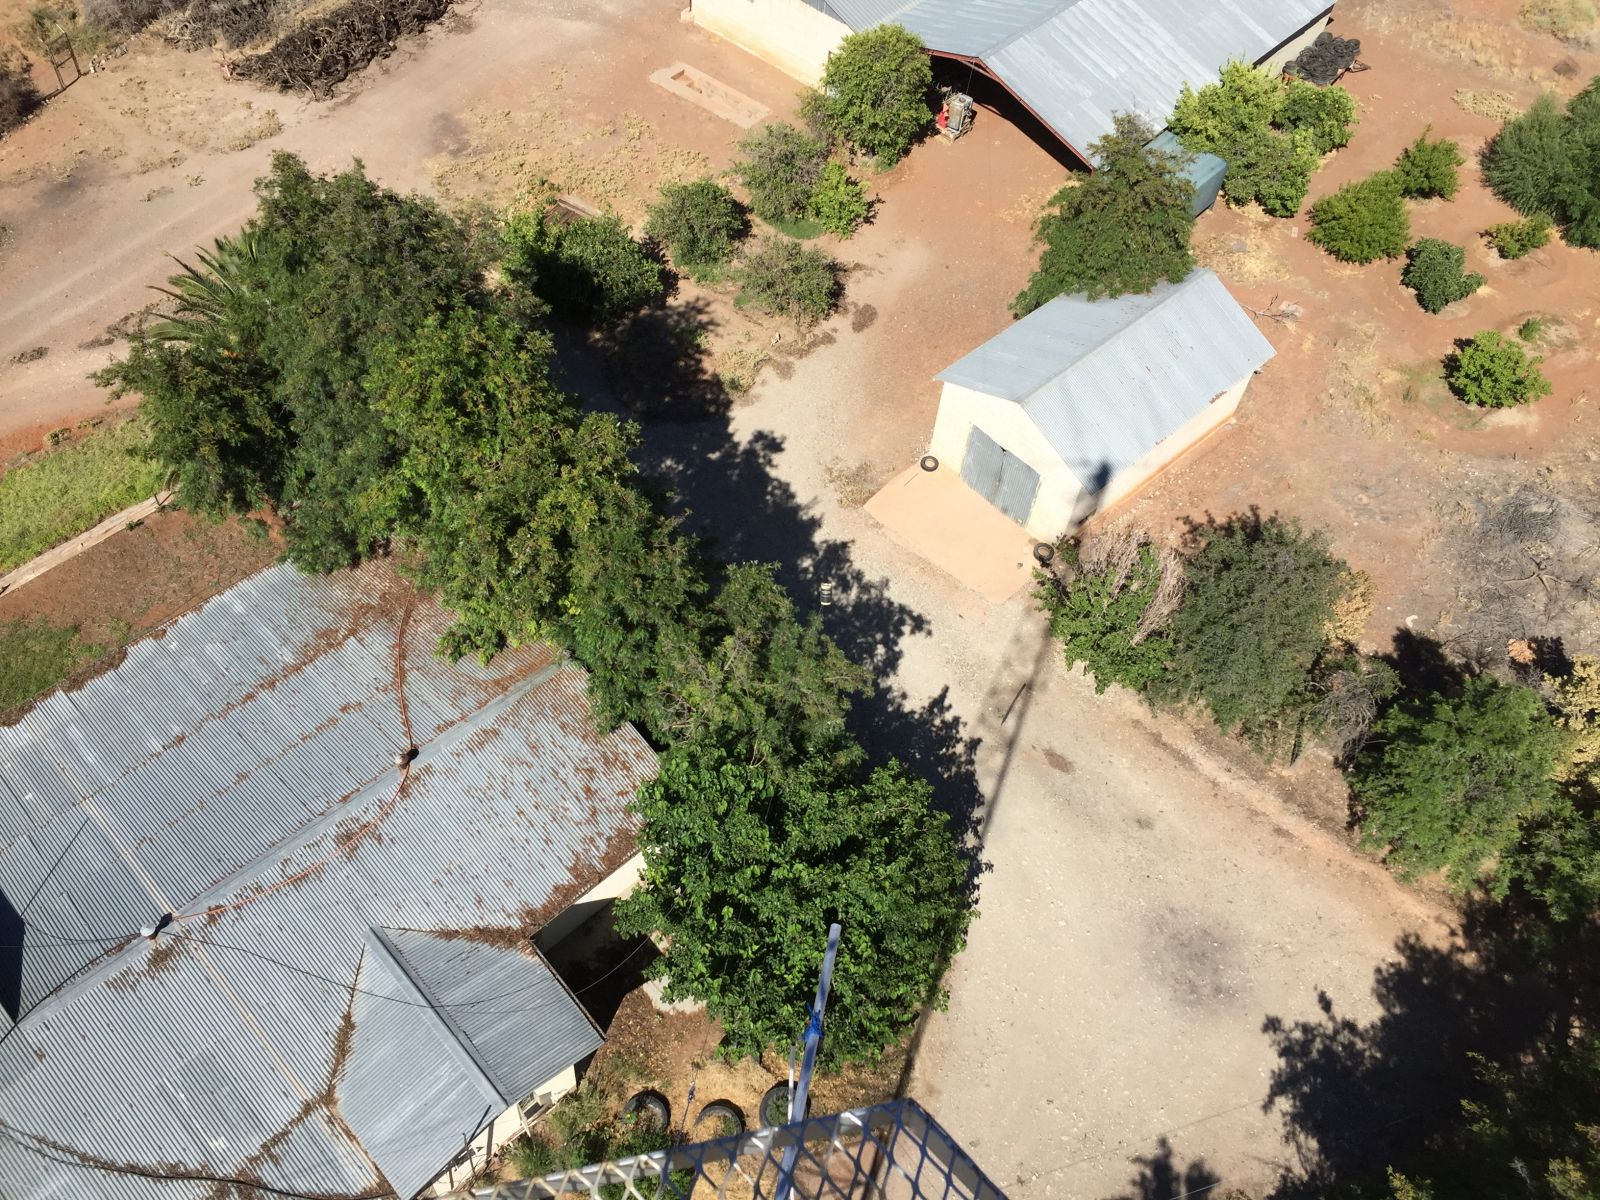 40m dipole faintly visible from tower to open barn